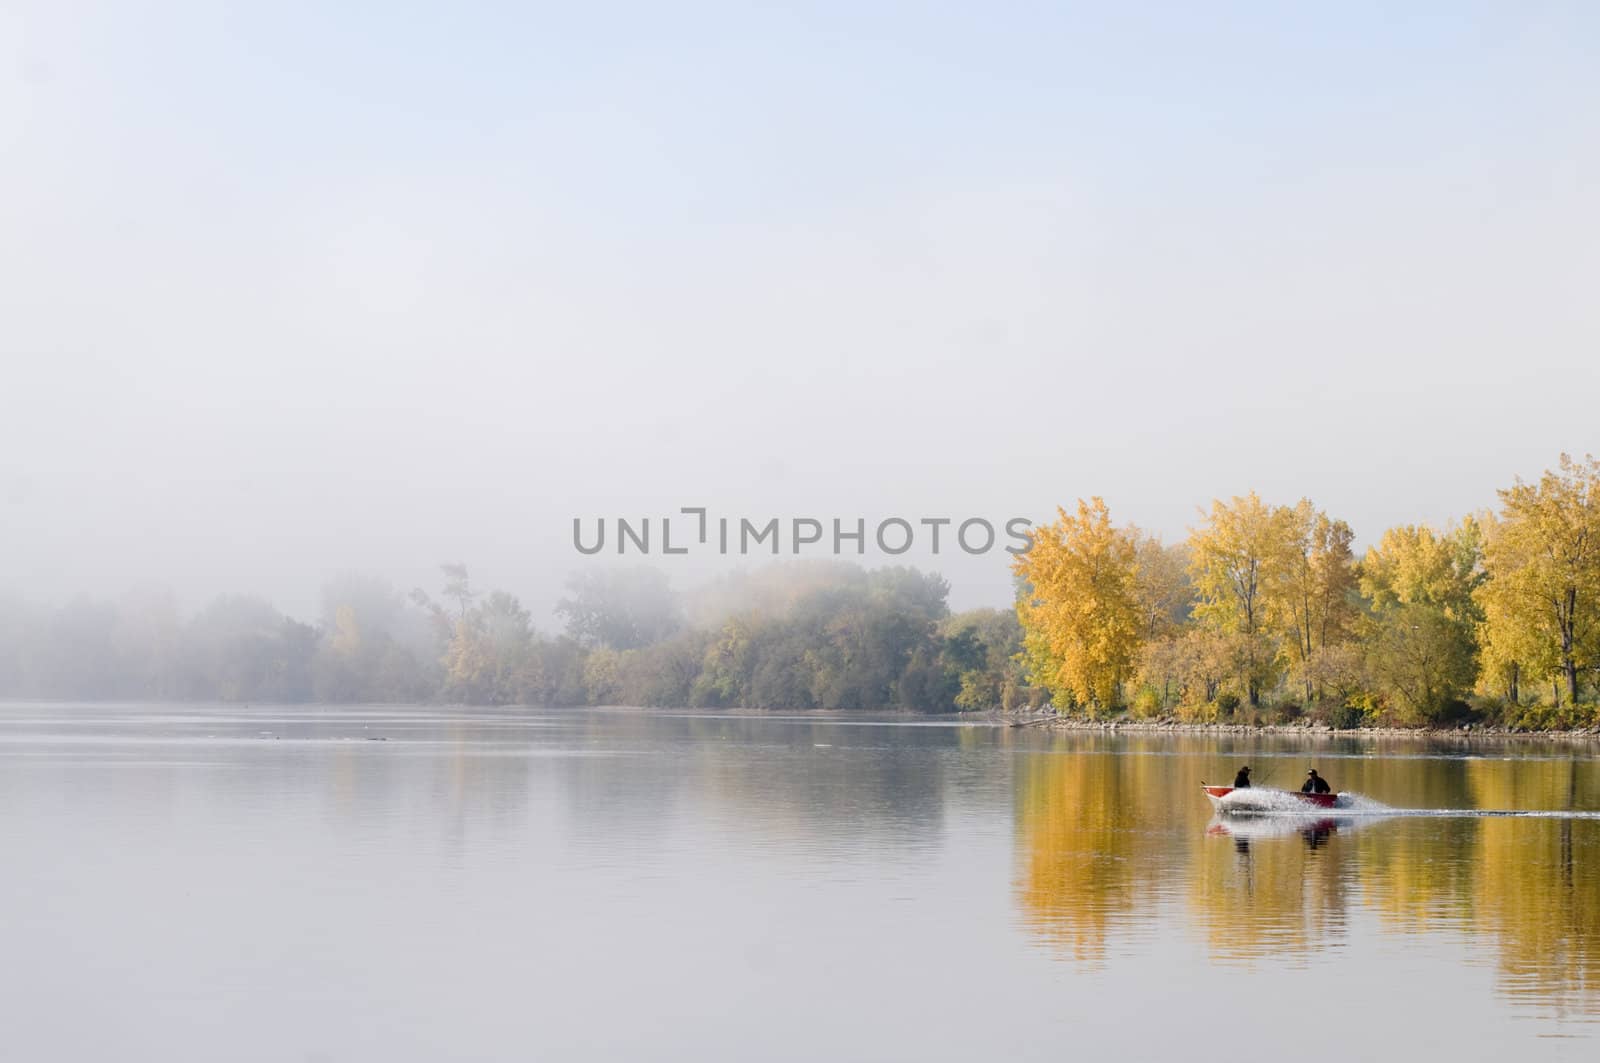 Two fishermen boating on the bay with the fog lifting